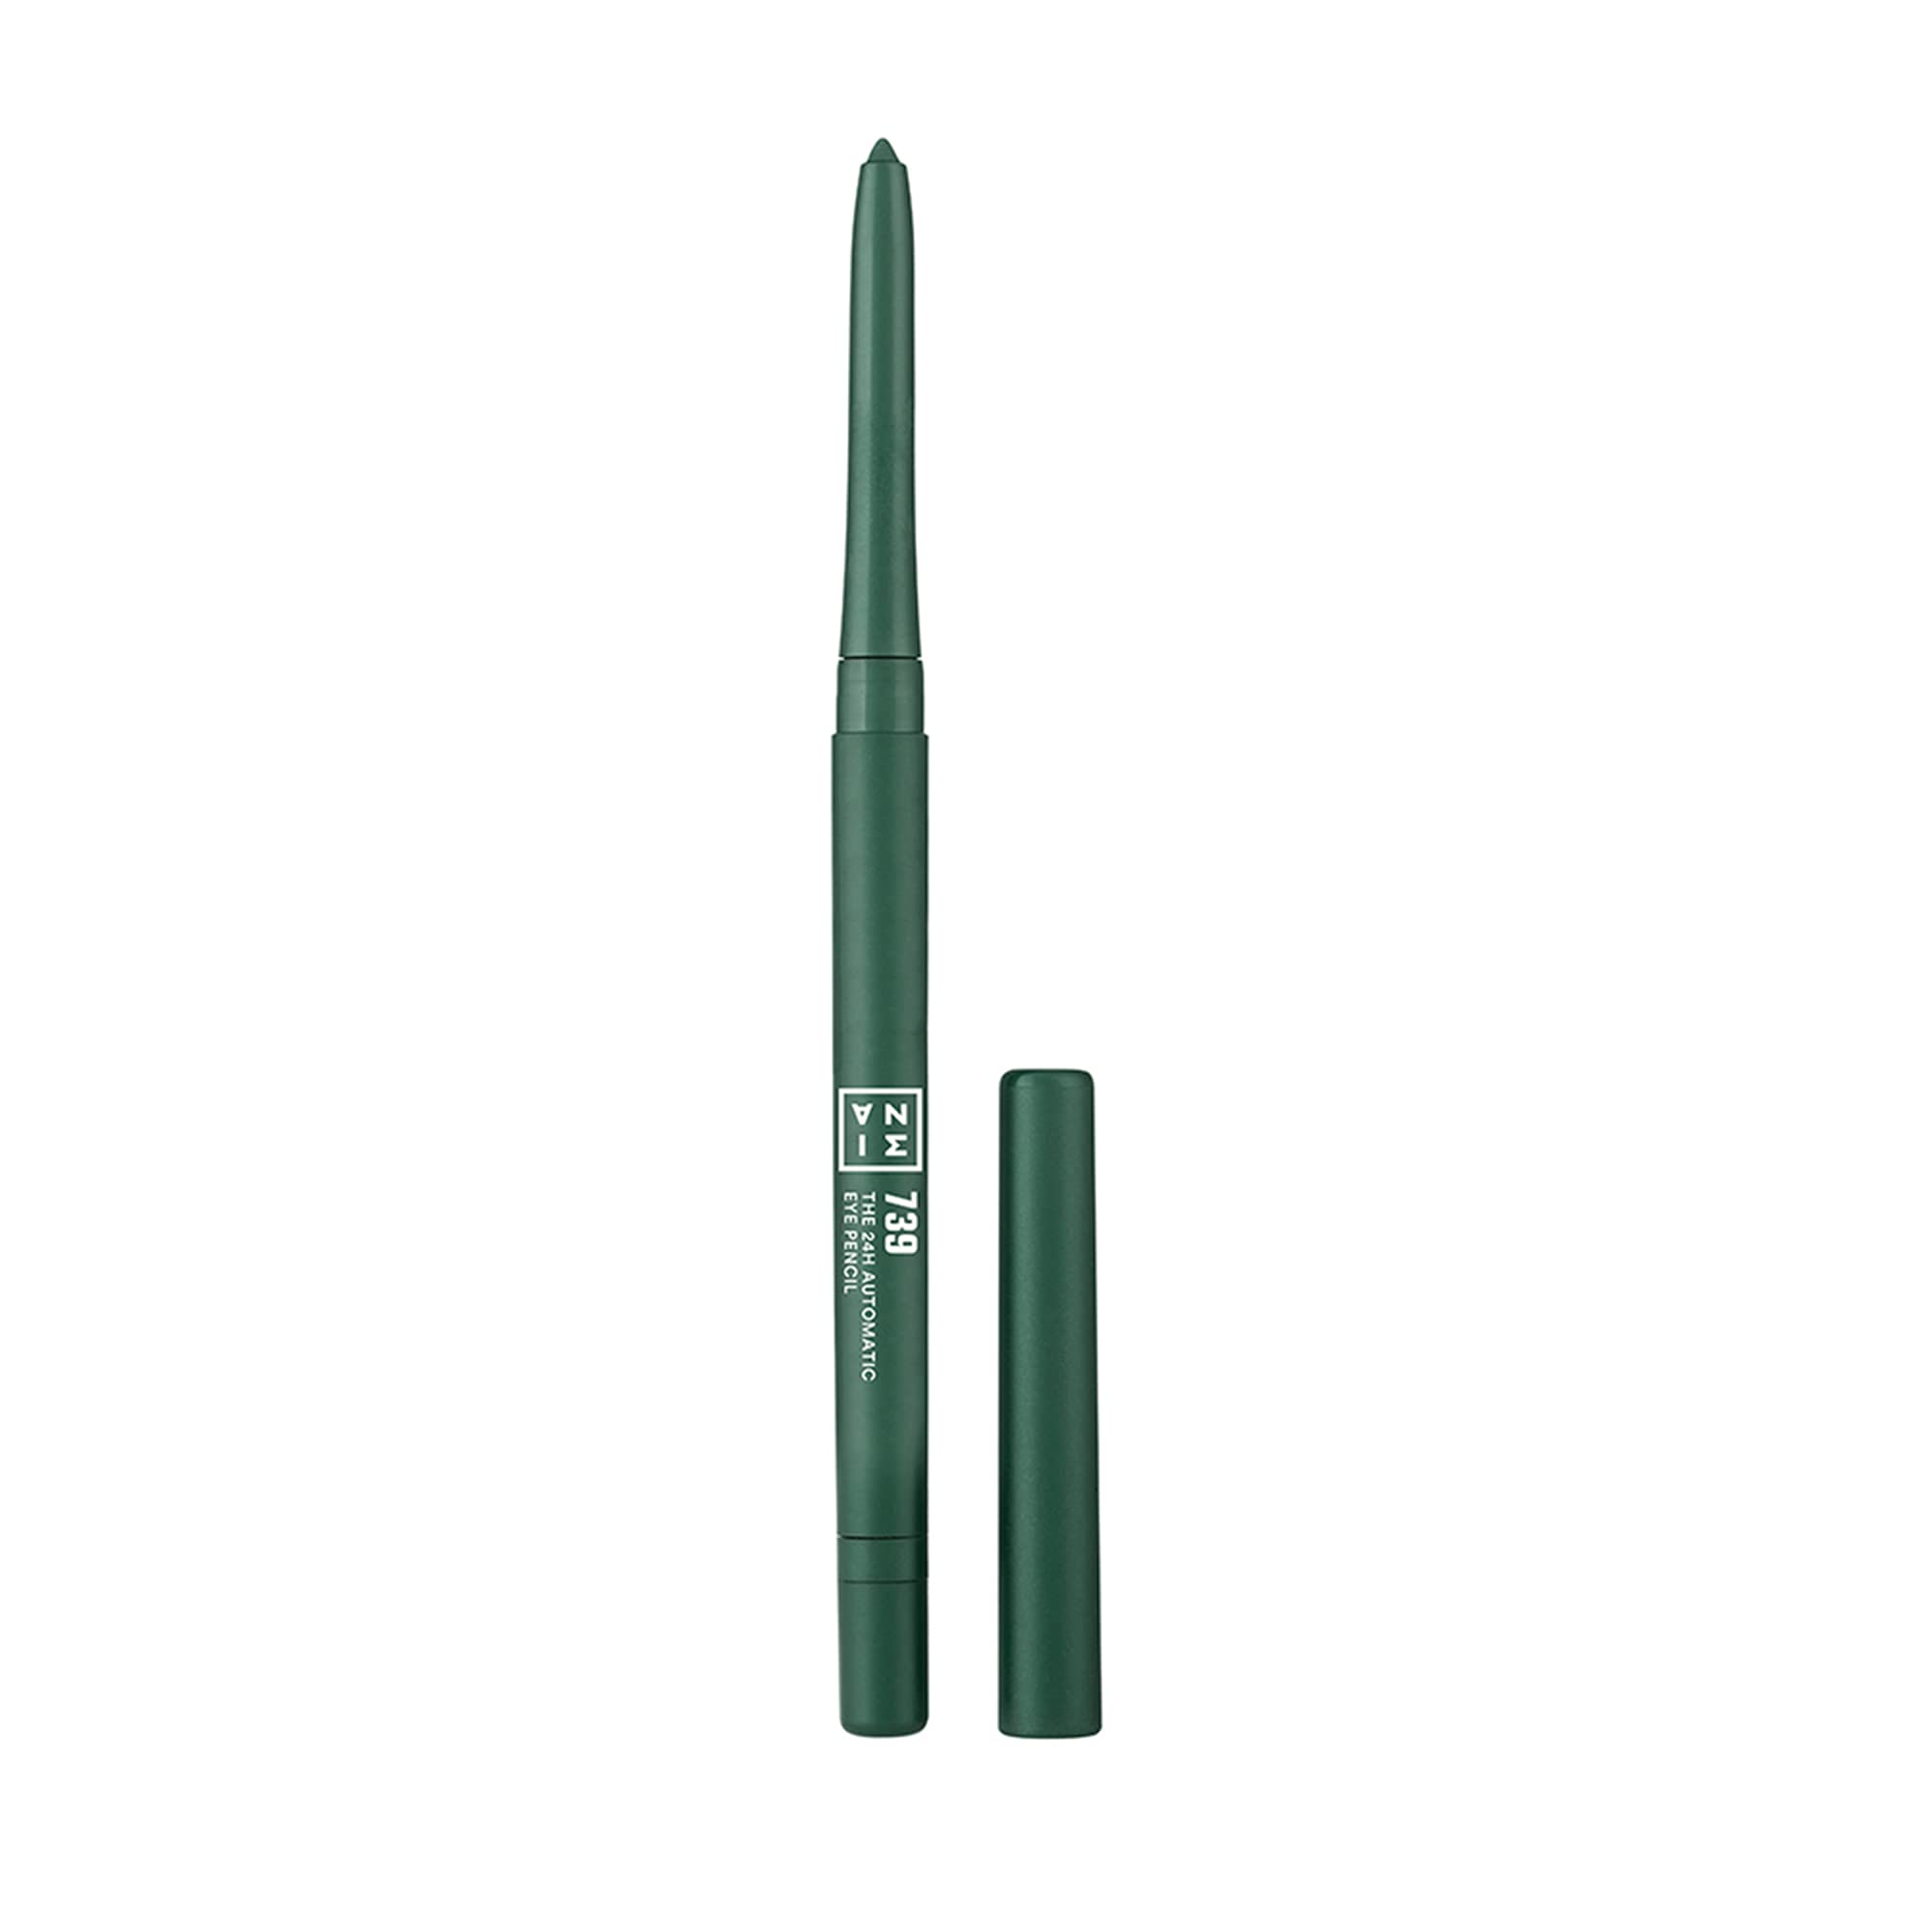 3ina The 24H Automatic Eye Pencil 739 - Highly Pigmented Formula - Waterproof - Easy To Apply - Retractable Tip - Creamy Long-We